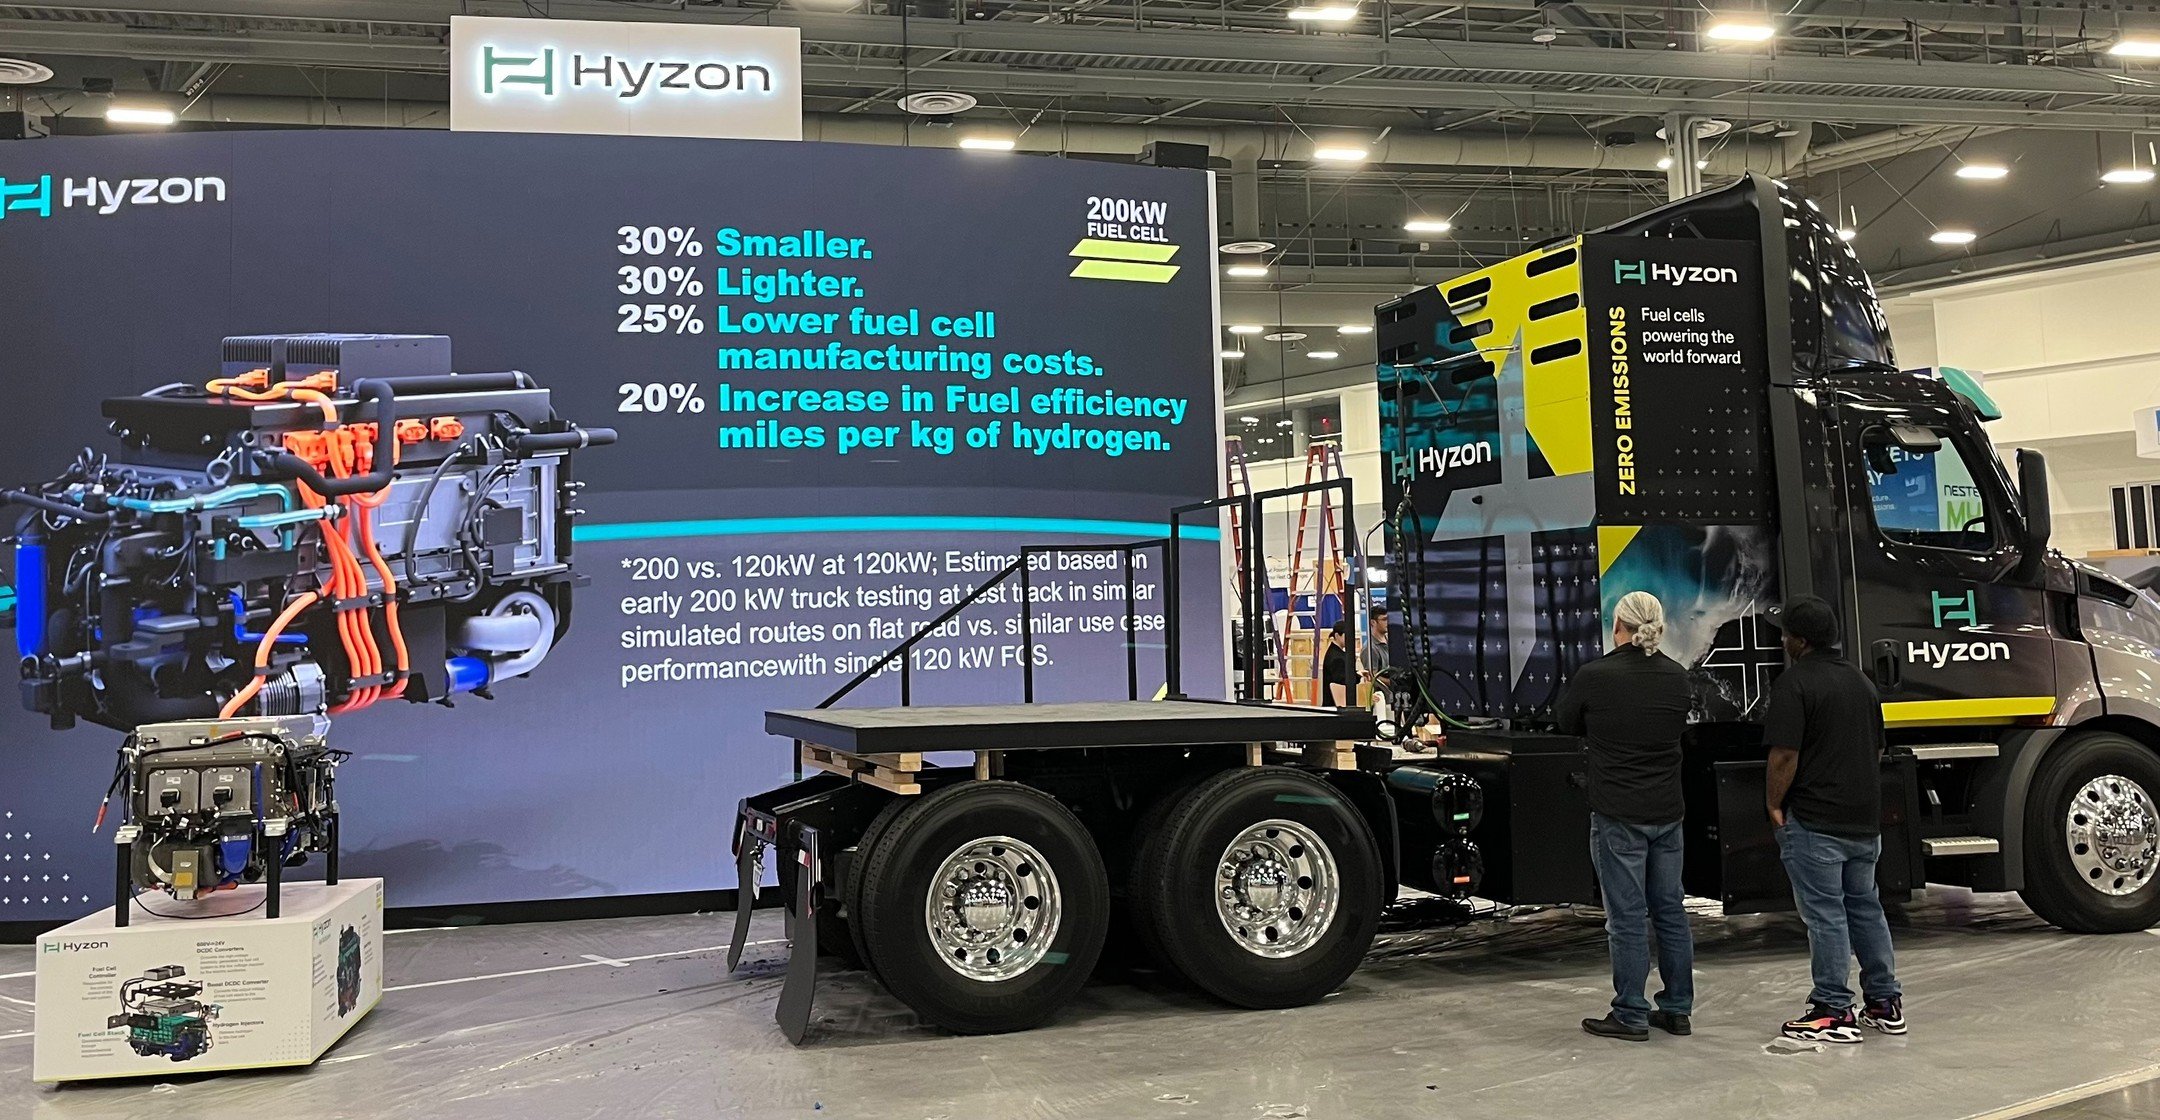 The stars of the show are here! Hyzon&rsquo;s single stack 200kW fuel cell system and hydrogen-powered truck are nearly ready to show off their heavy-duty, zero-emissions power.

Join us tomorrow at Booth No. 1631 for the first day of #ACTExpo and ex